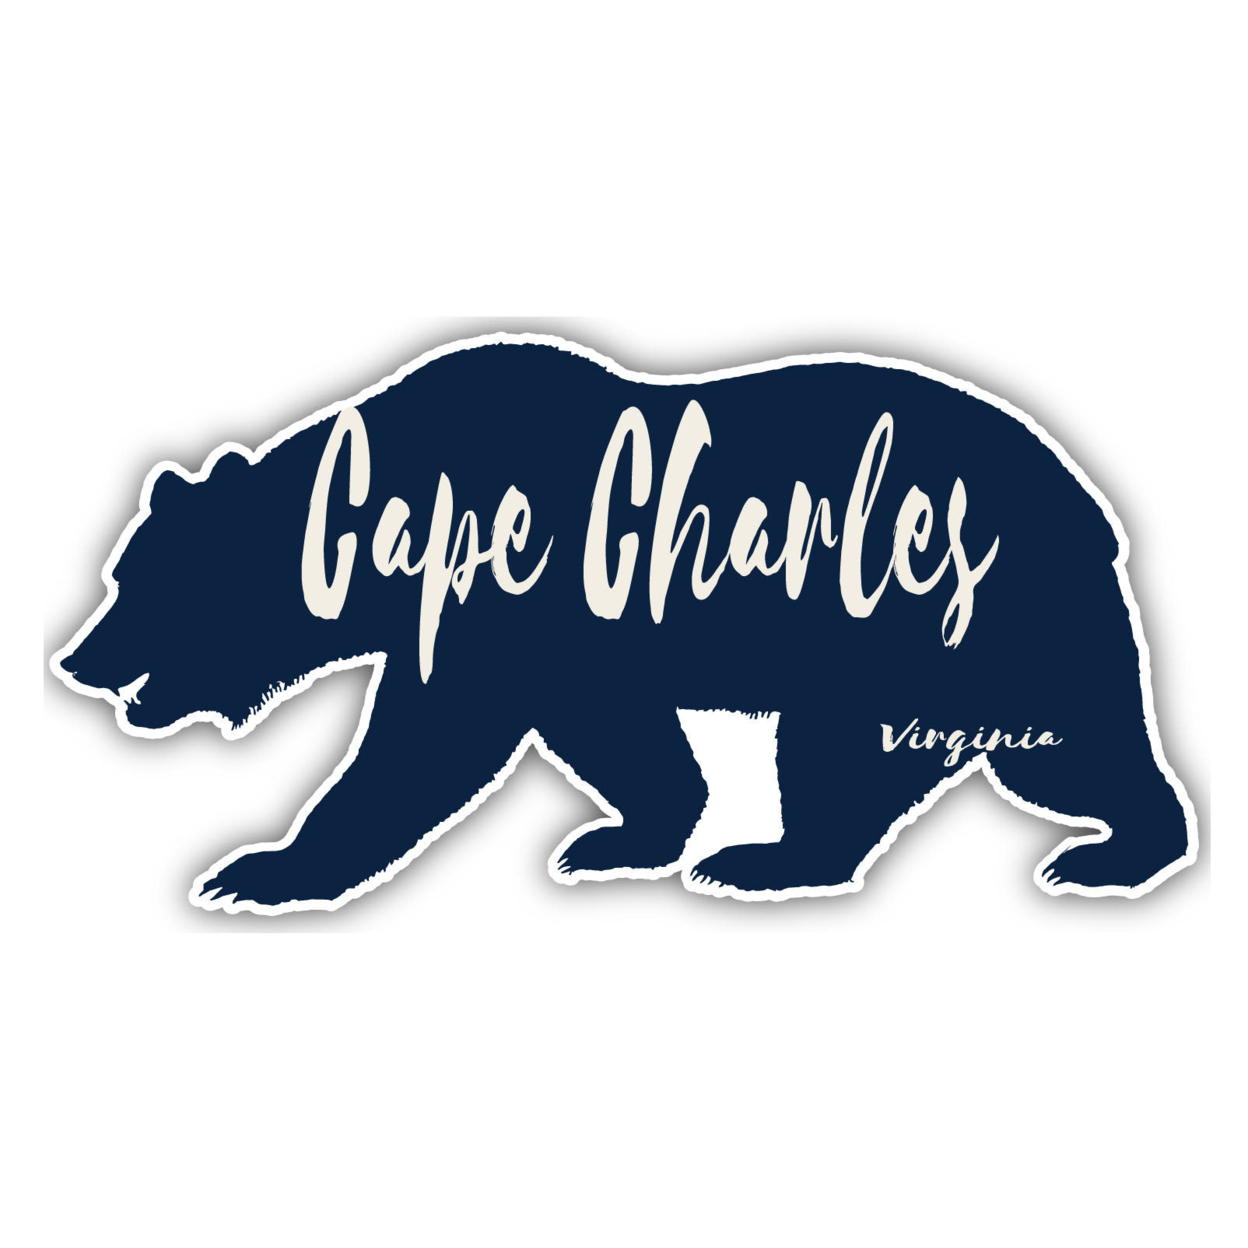 Cape Charles Virginia Souvenir Decorative Stickers (Choose Theme And Size) - 4-Pack, 6-Inch, Camp Life